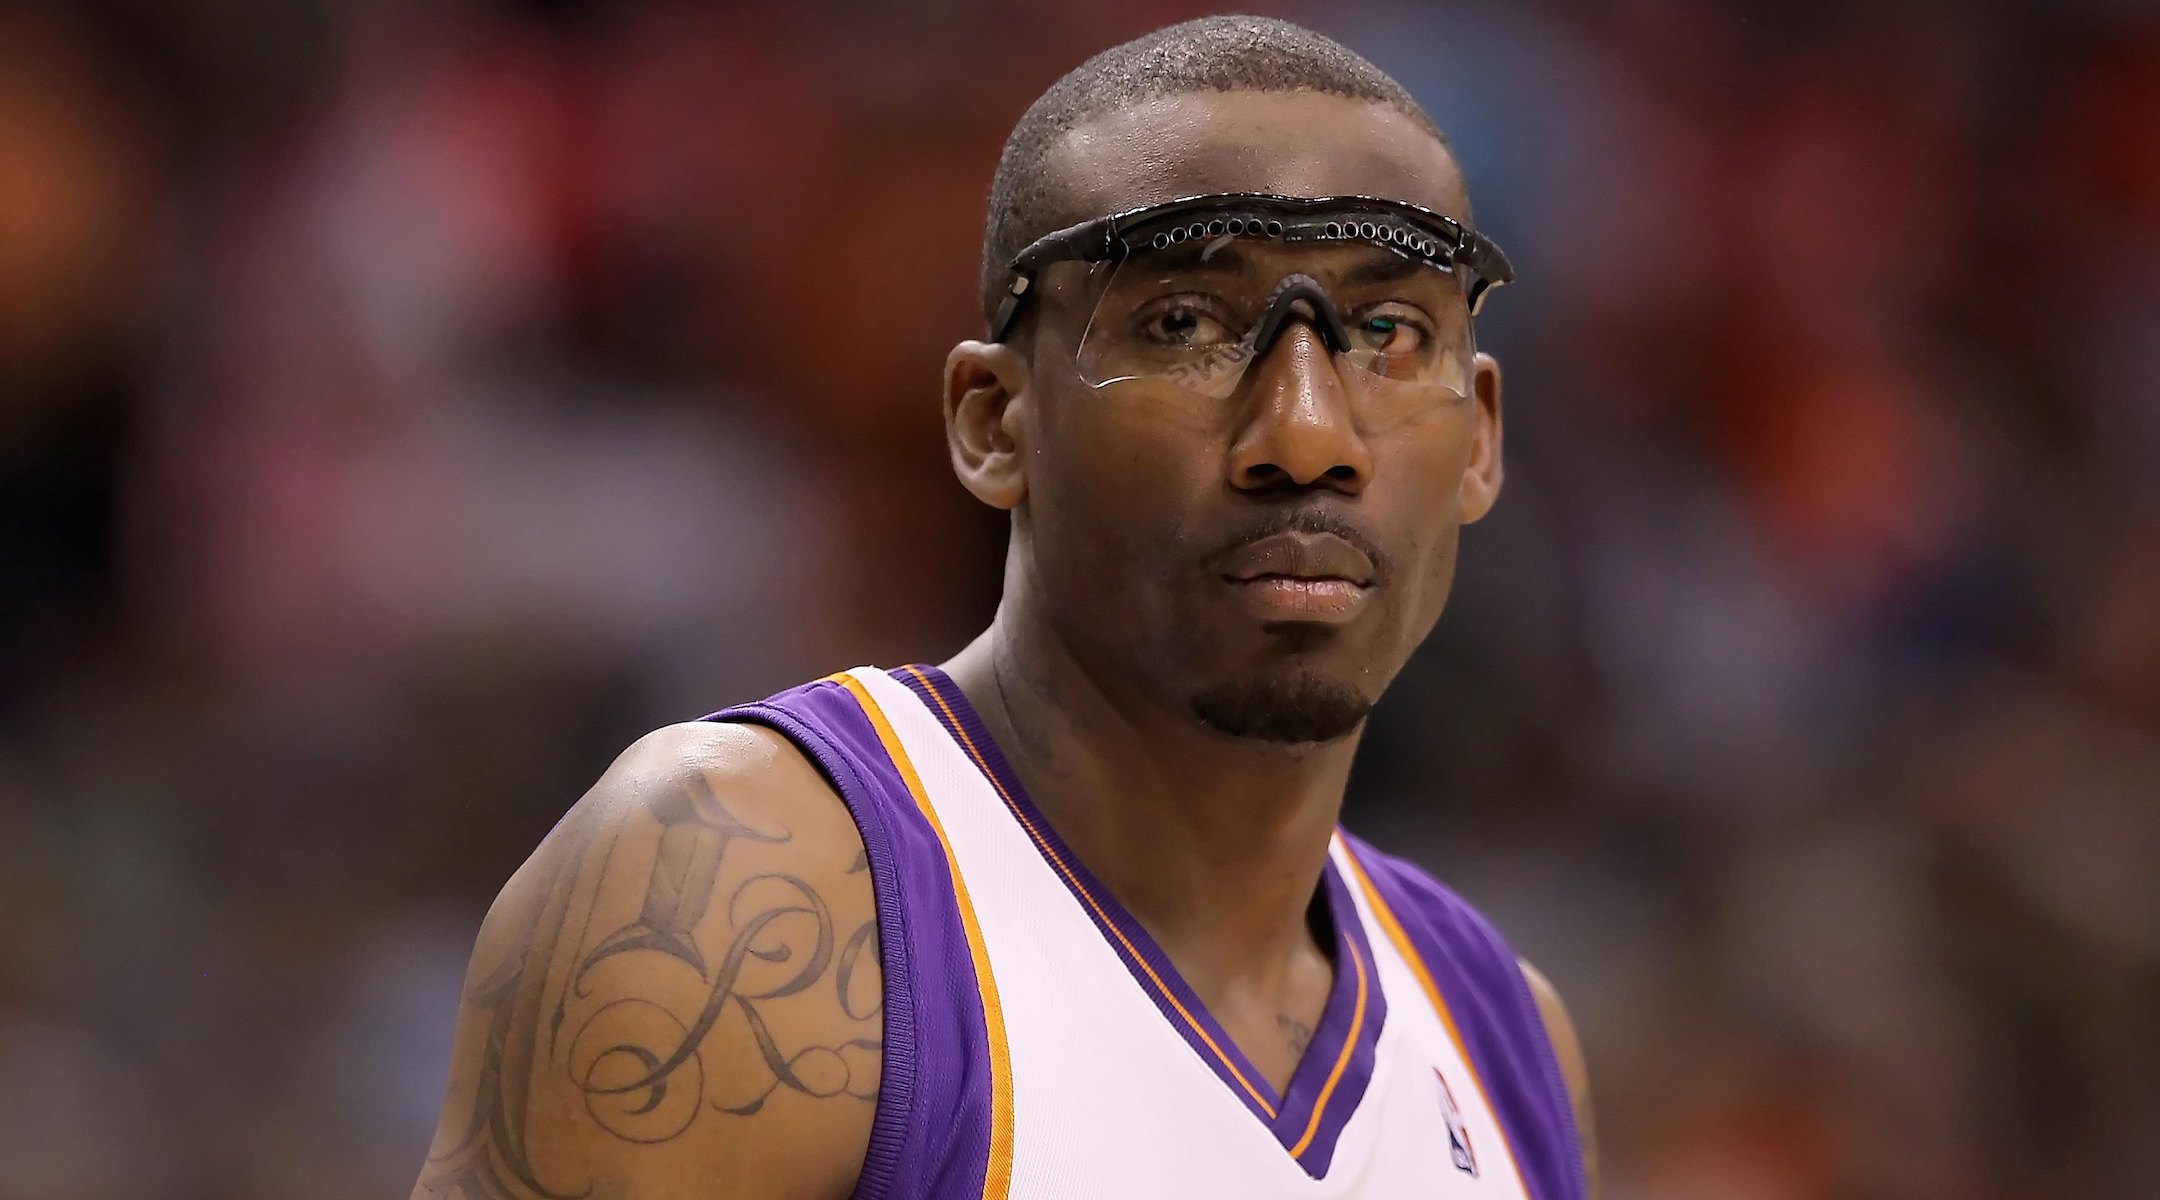 Shawn Marion, Amar'e Stoudemire to enter Suns Ring of Honor